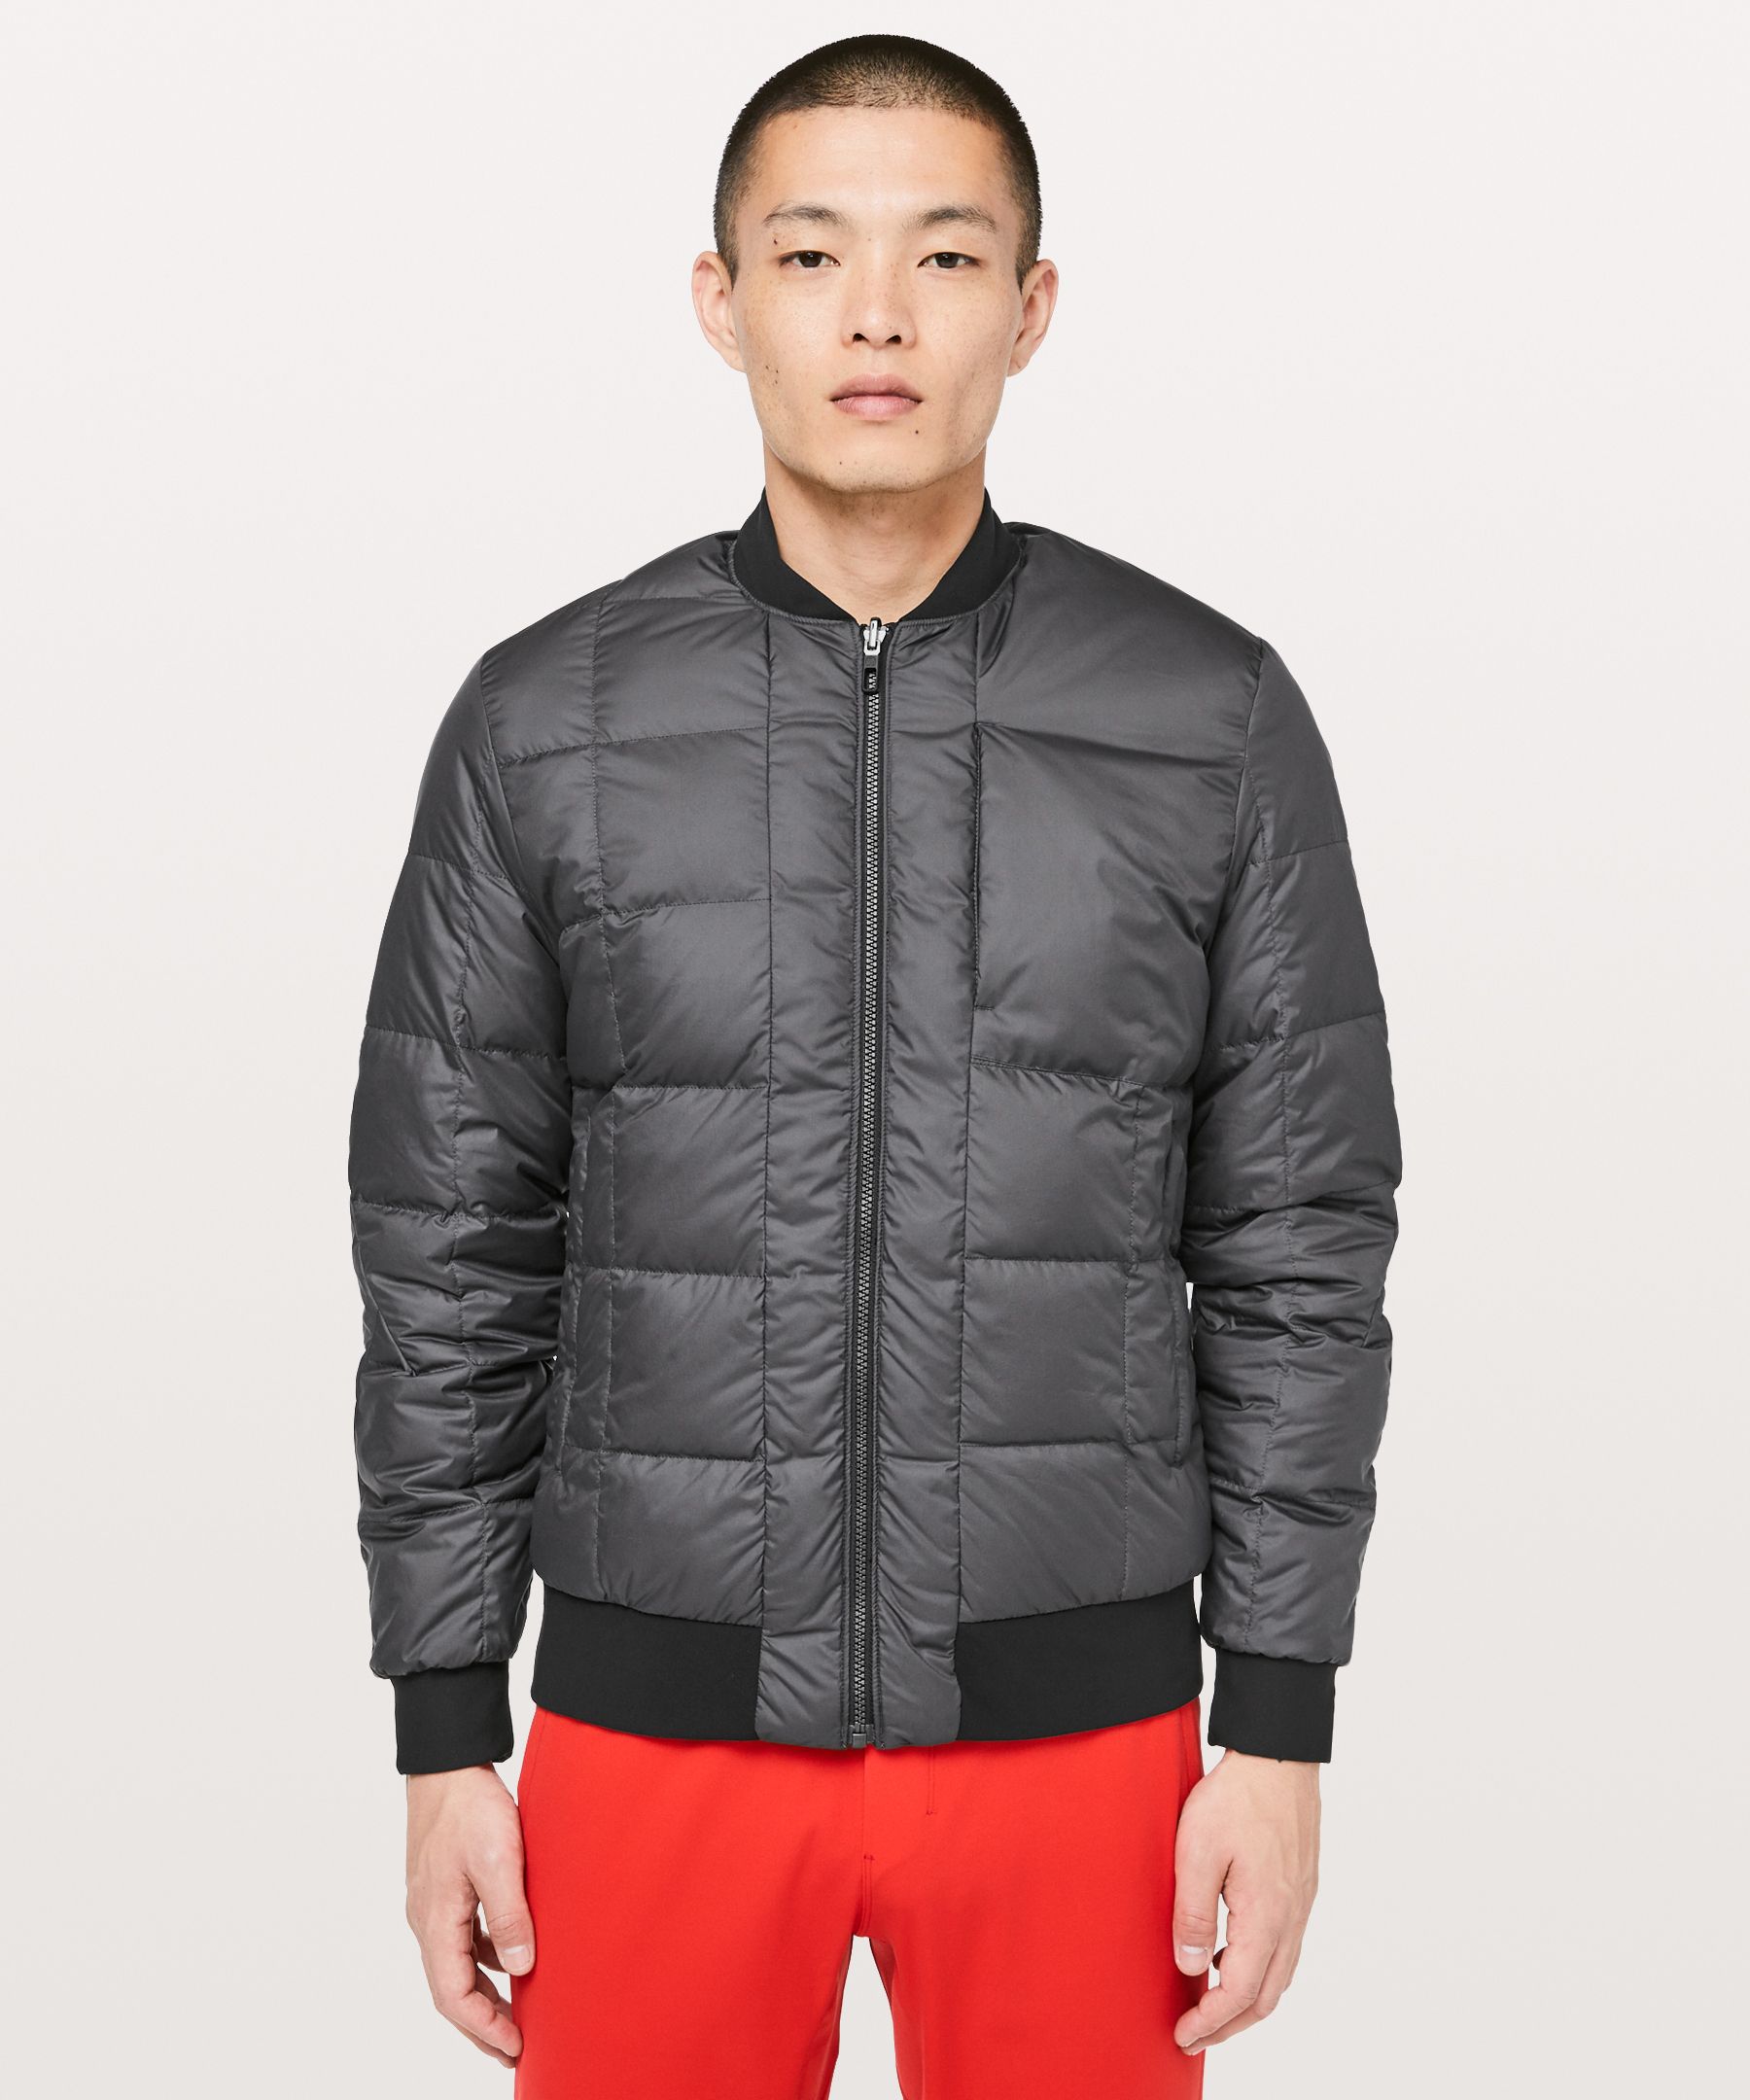 About-Face Bomber *Lunar New Year 